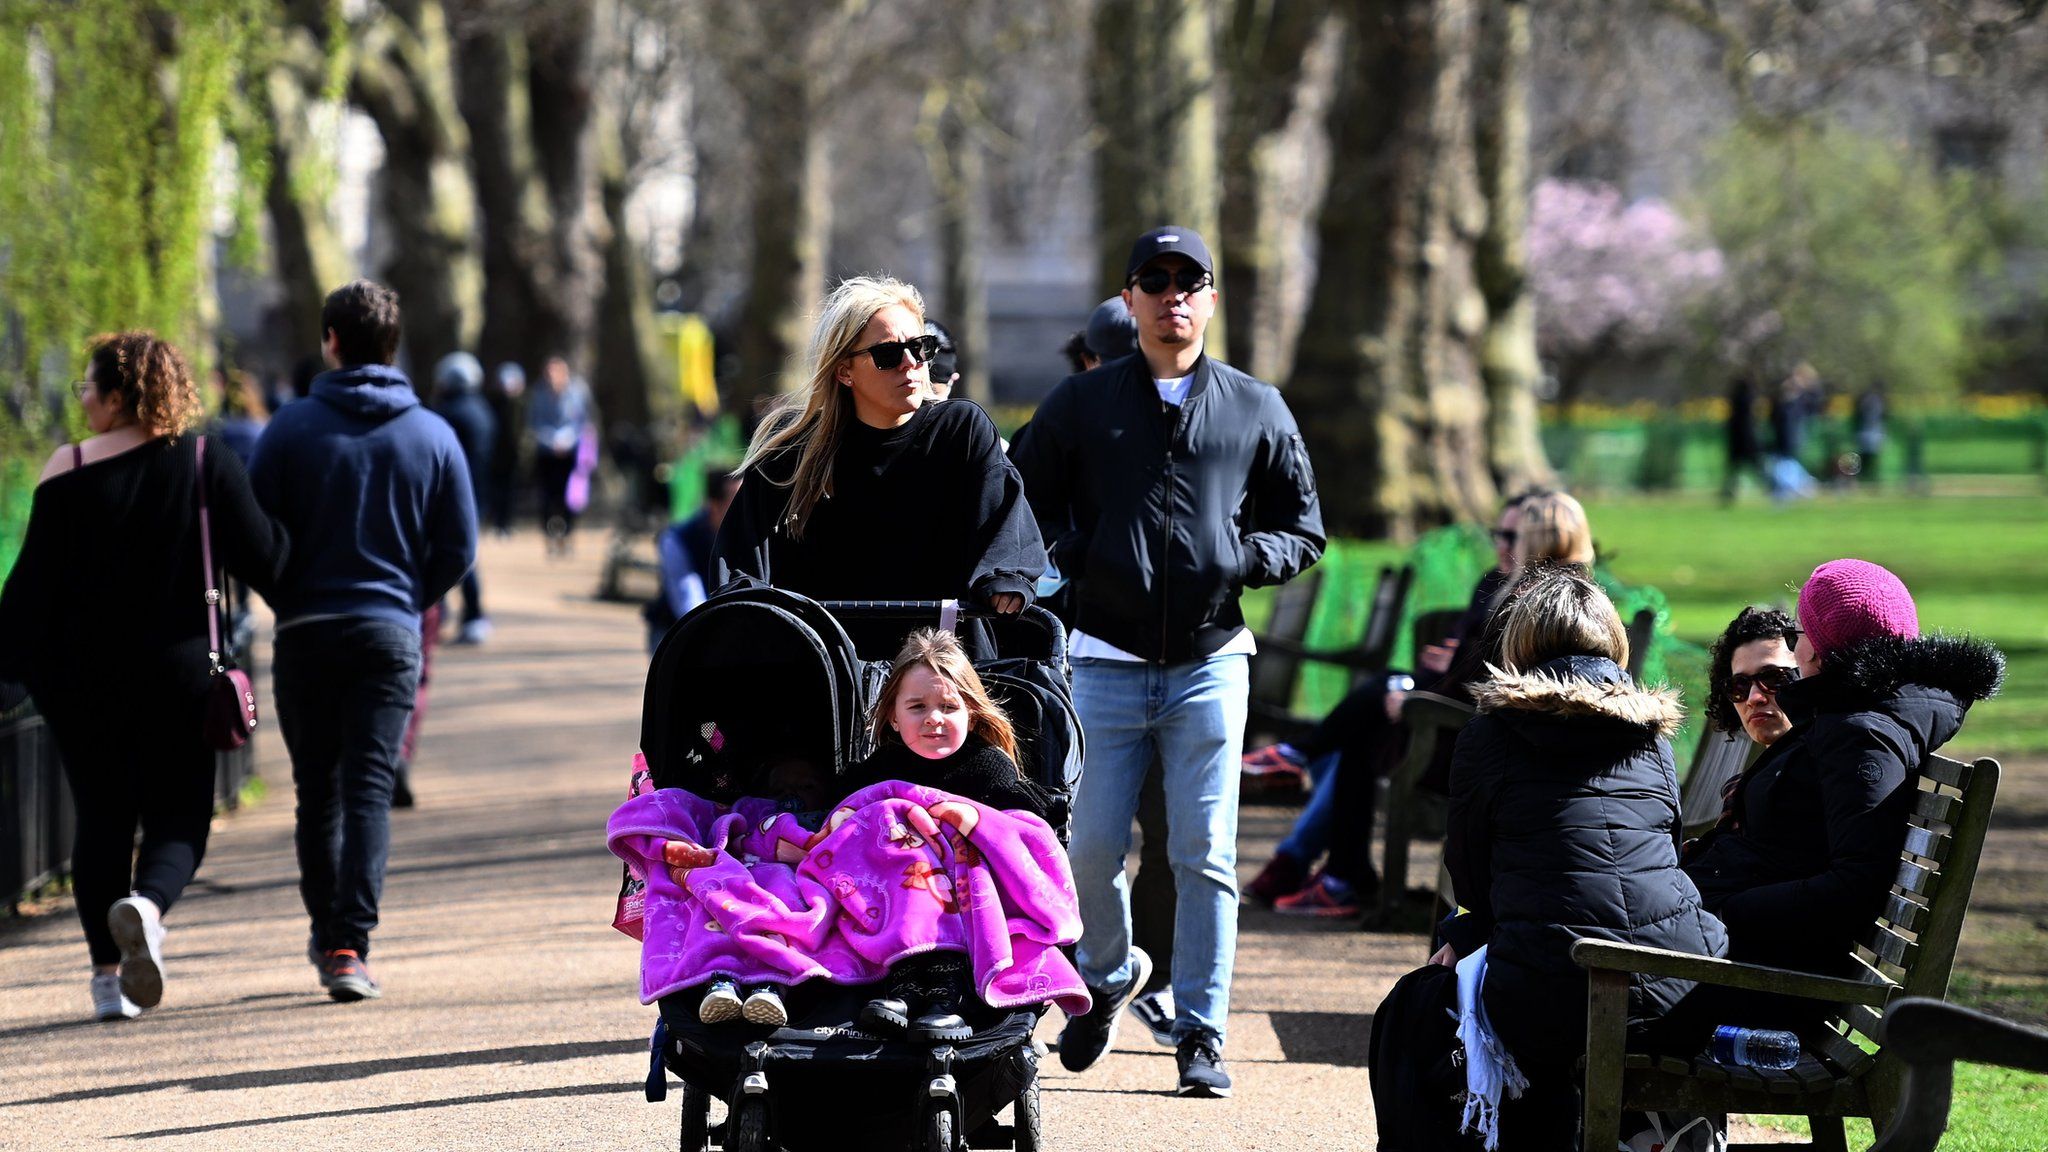 People walk through St. James"s Park in London, Britain, 27 March 2021